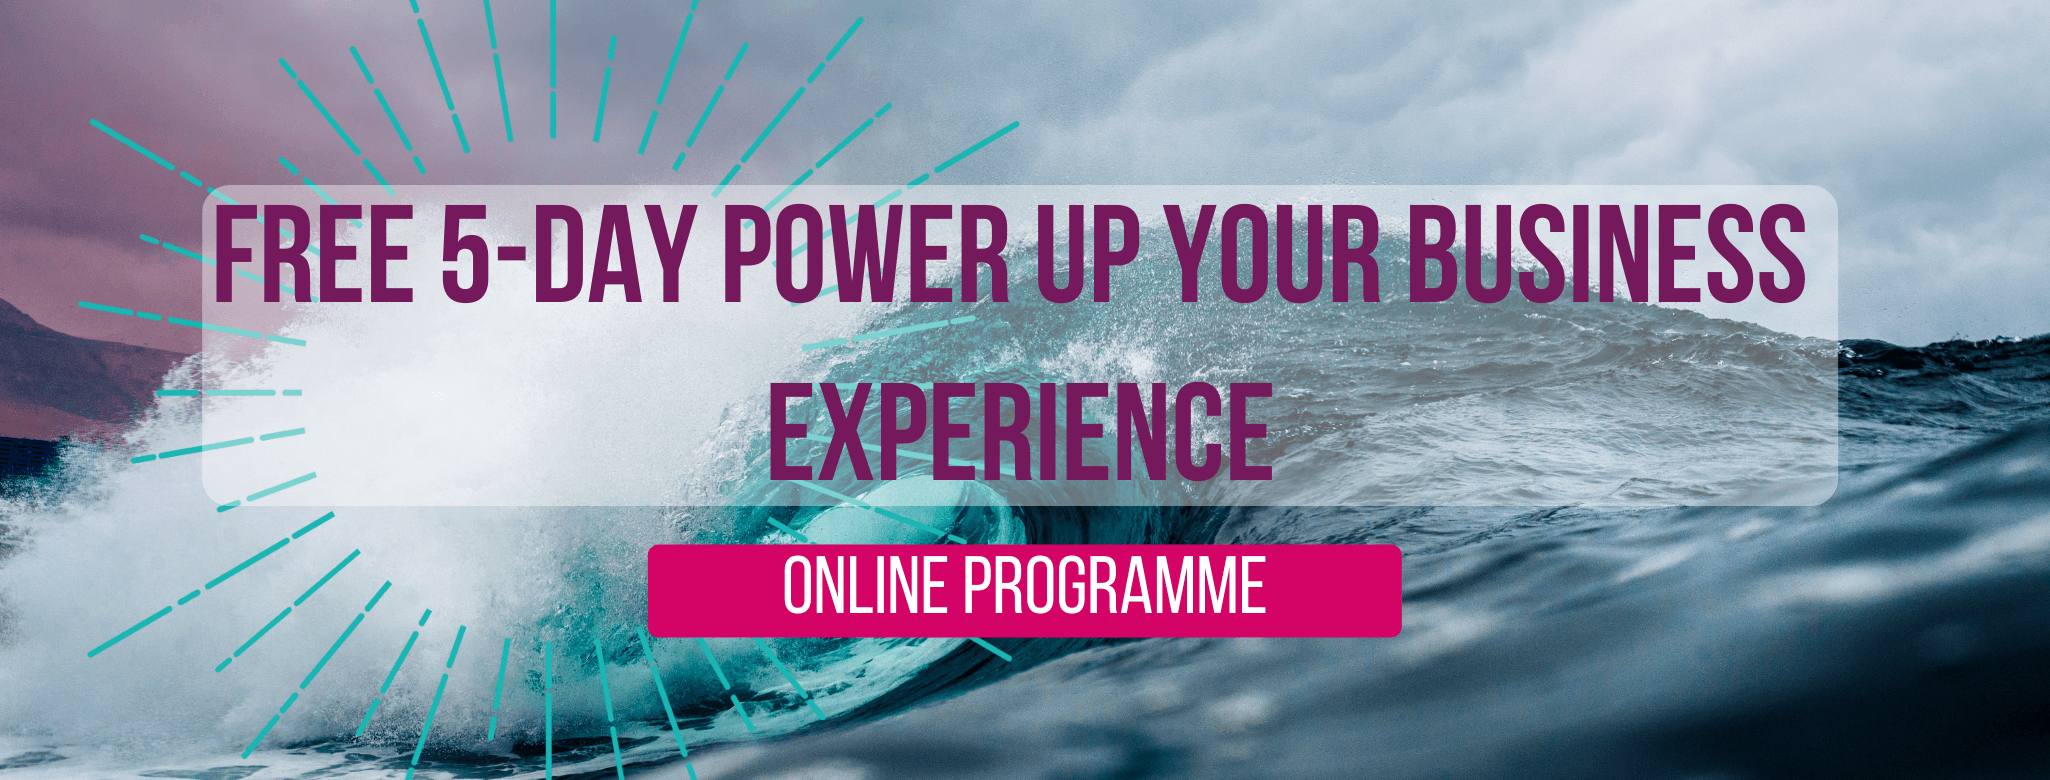 power up your business experience